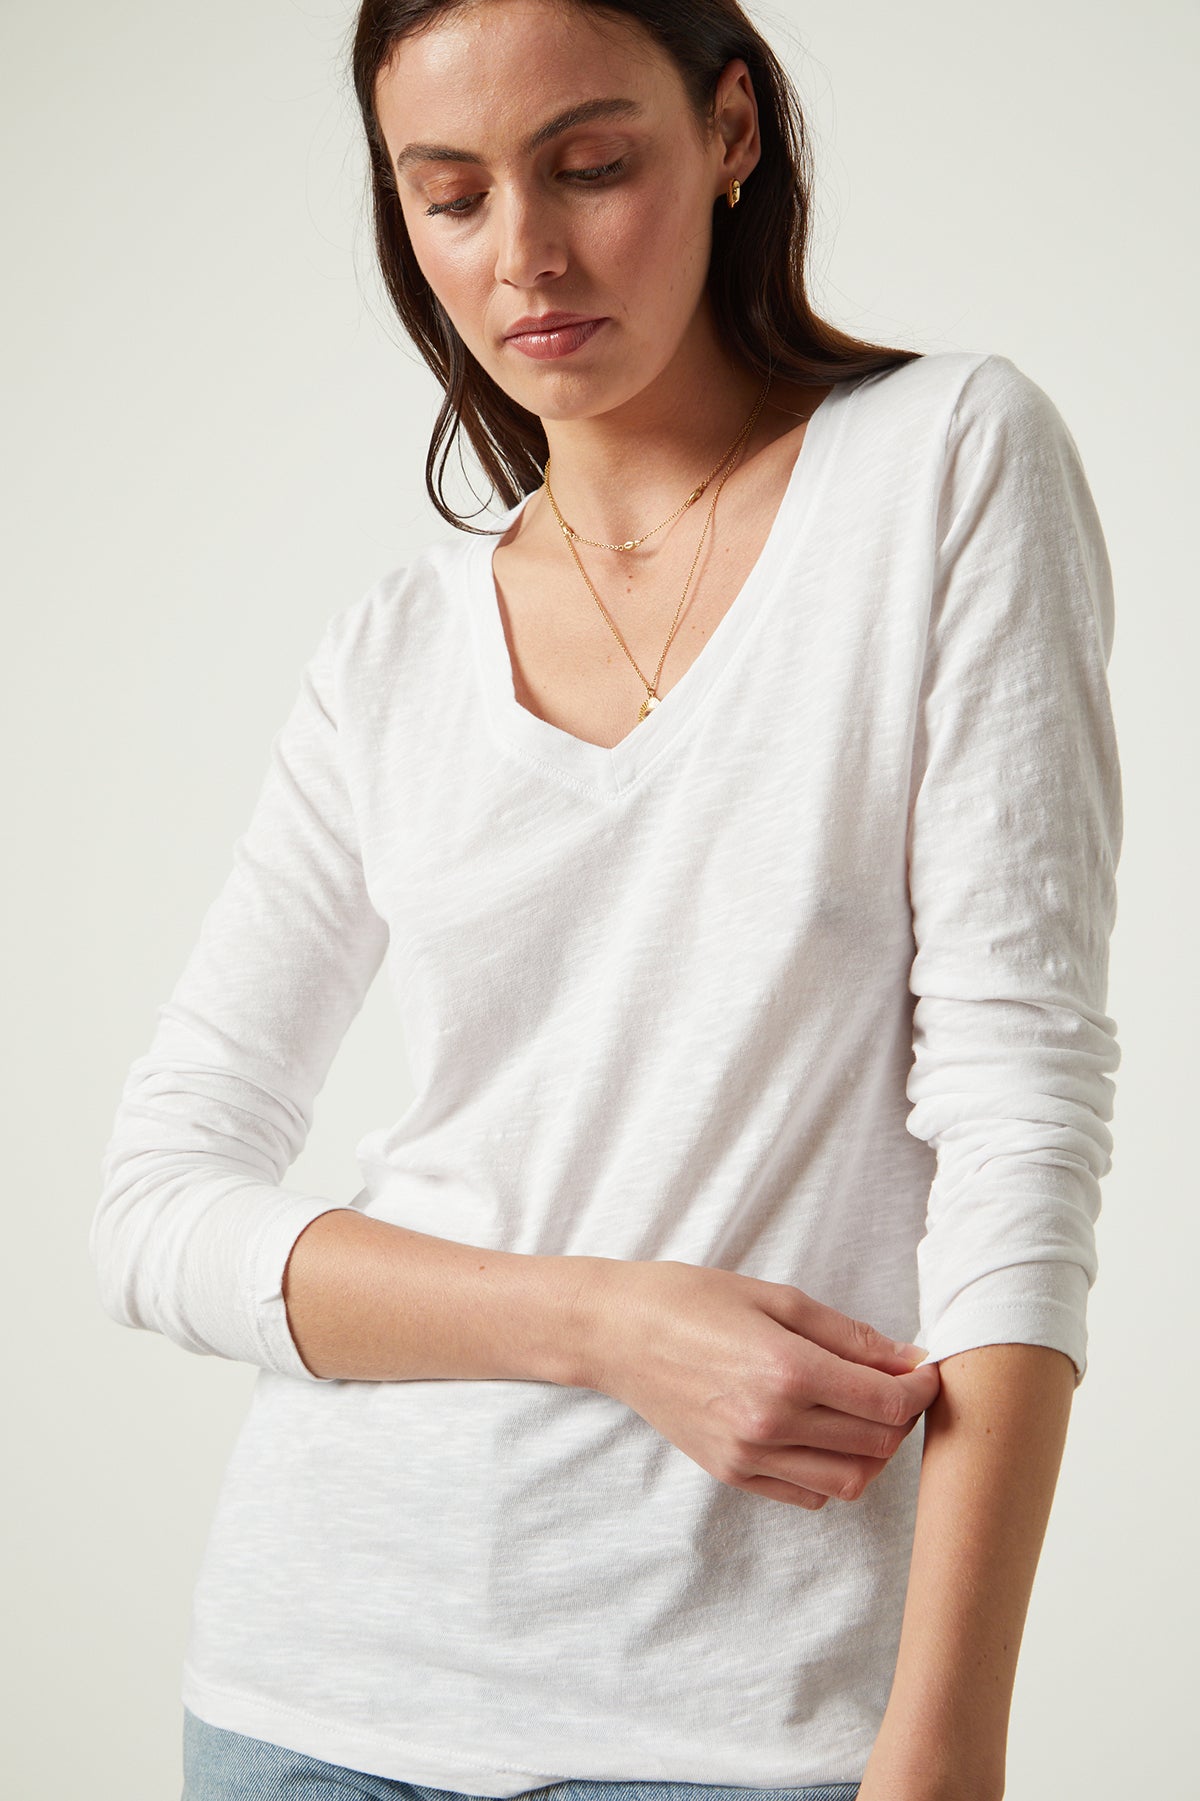   Blaire Original Slub Long Sleeve Tee with V Neck in white close up front detail 